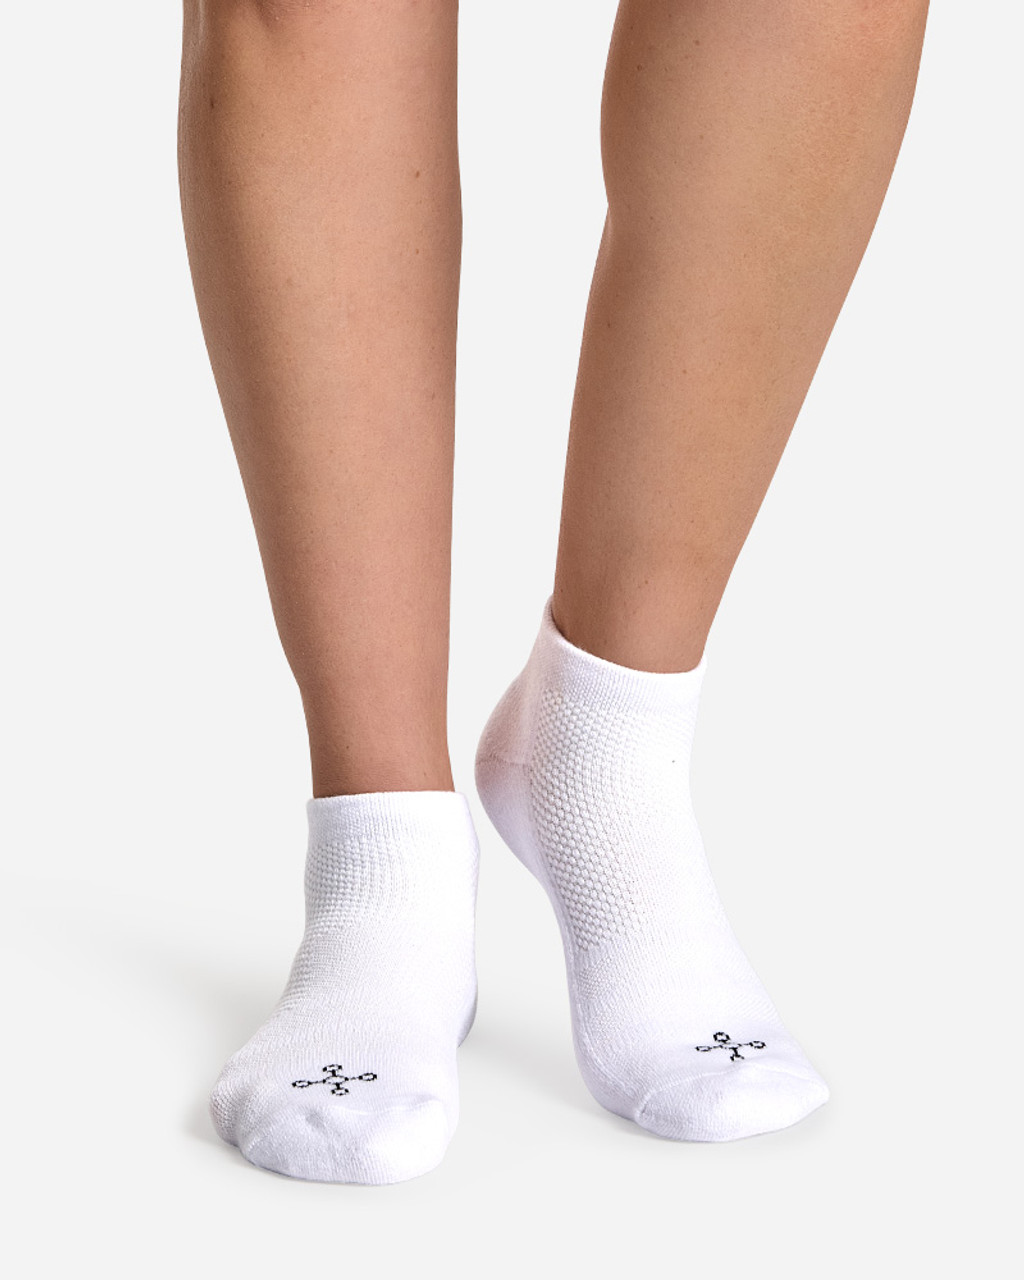 Easy-On Compression Socks with Infrared